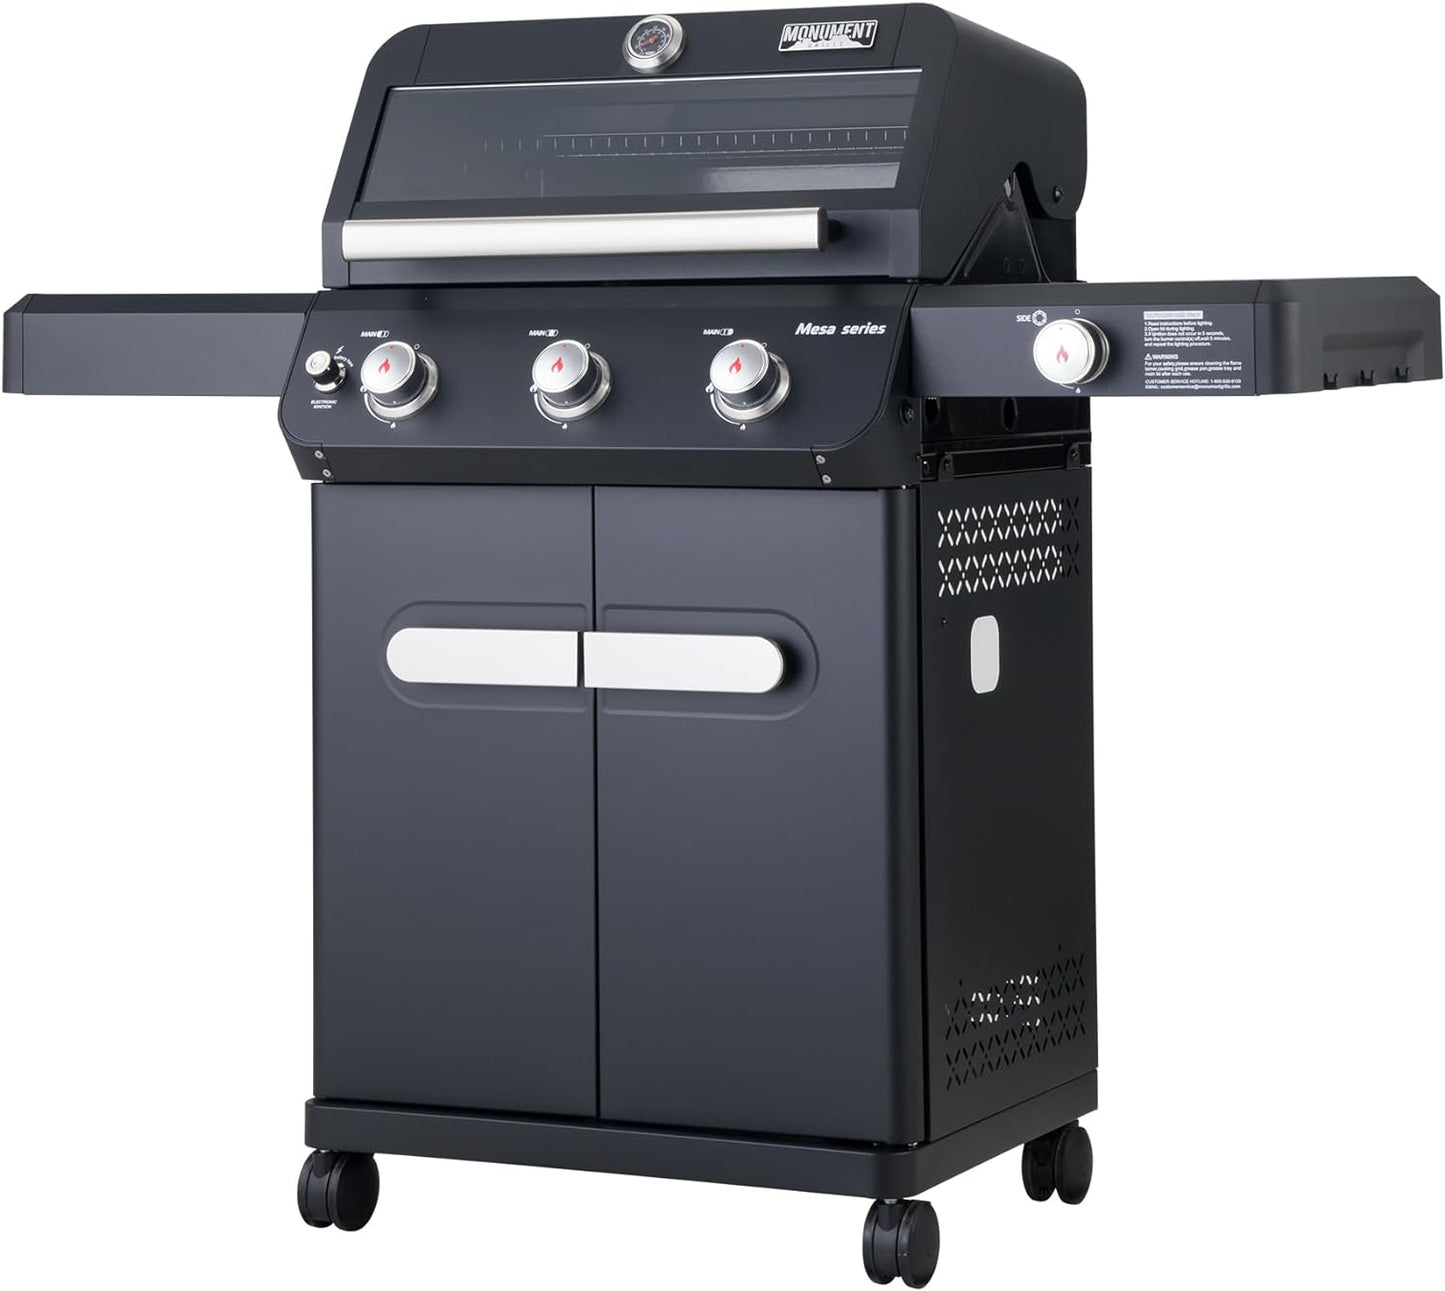 Outdoor Barbecue Stainless Steel 3 Burner Propane Gas Grill, 48,000 BTU Patio Garden Grill with Side Burner and LED Controls, Mesa325, Black